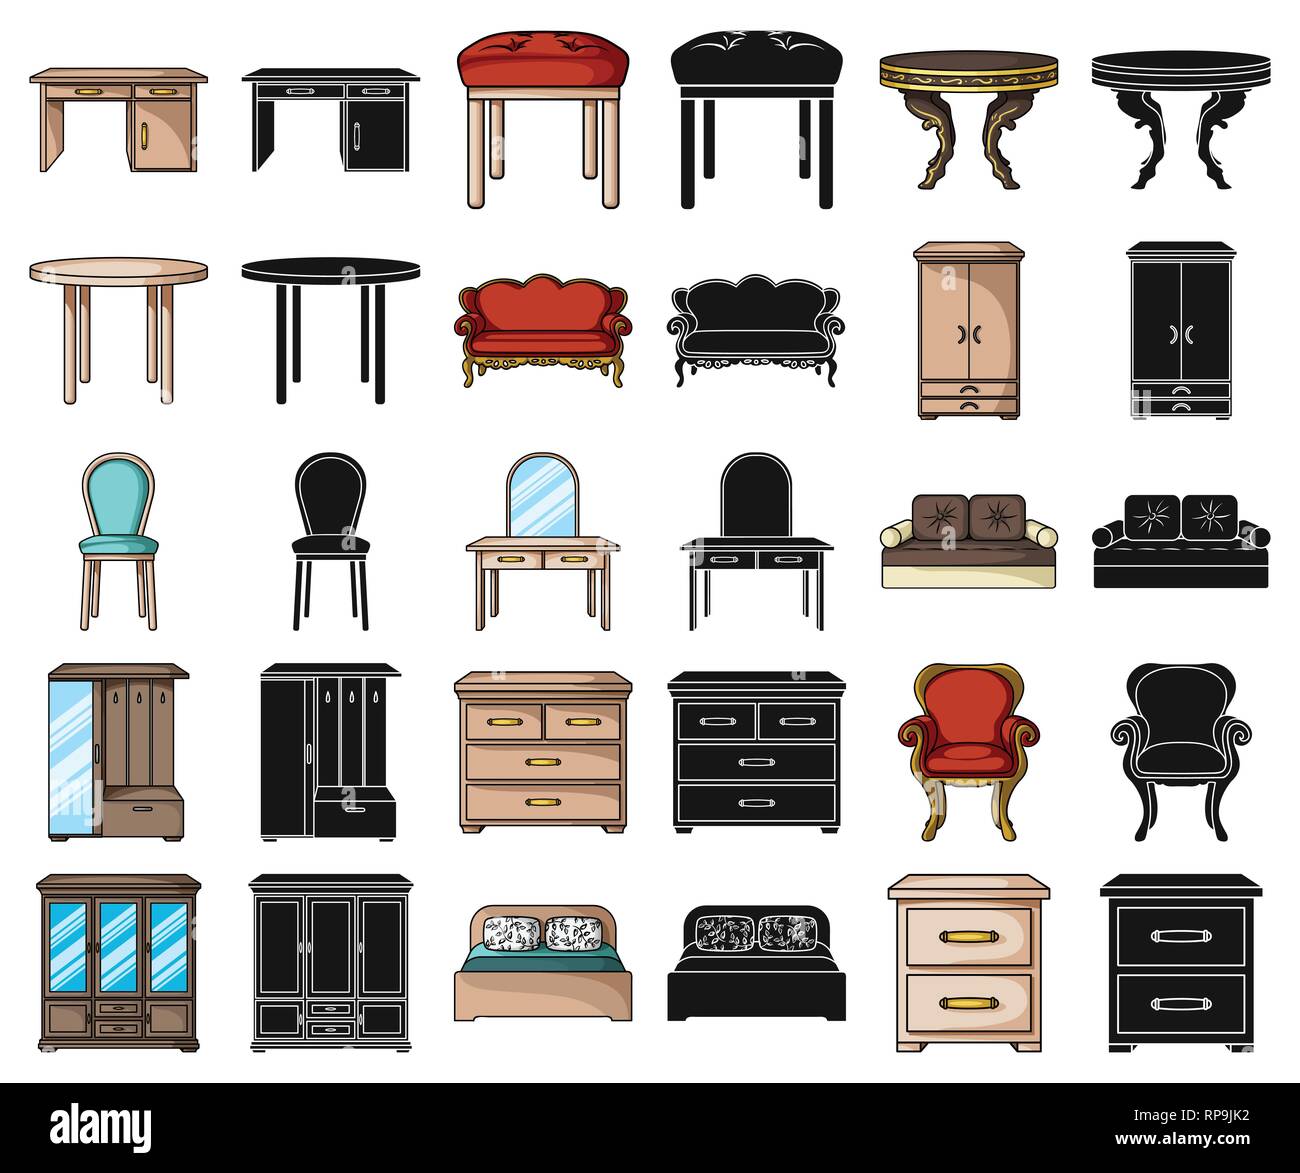 accessory,apartment,armchair,art,back,baroque,bed,bedside,cabinet,cartoon,black,chair,classical,closet,collection,couch,cupboard,design,desk,double,drawers,dressing,furnishing,furniture,home,house,icon,illustration,interior,isolated,logo,modern,office,retro,round,set,sign,sofa,stool,symbol,table,various,vector,vestibule,vintage,wardrobe,web,wing,wooden Vector Vectors , Stock Vector